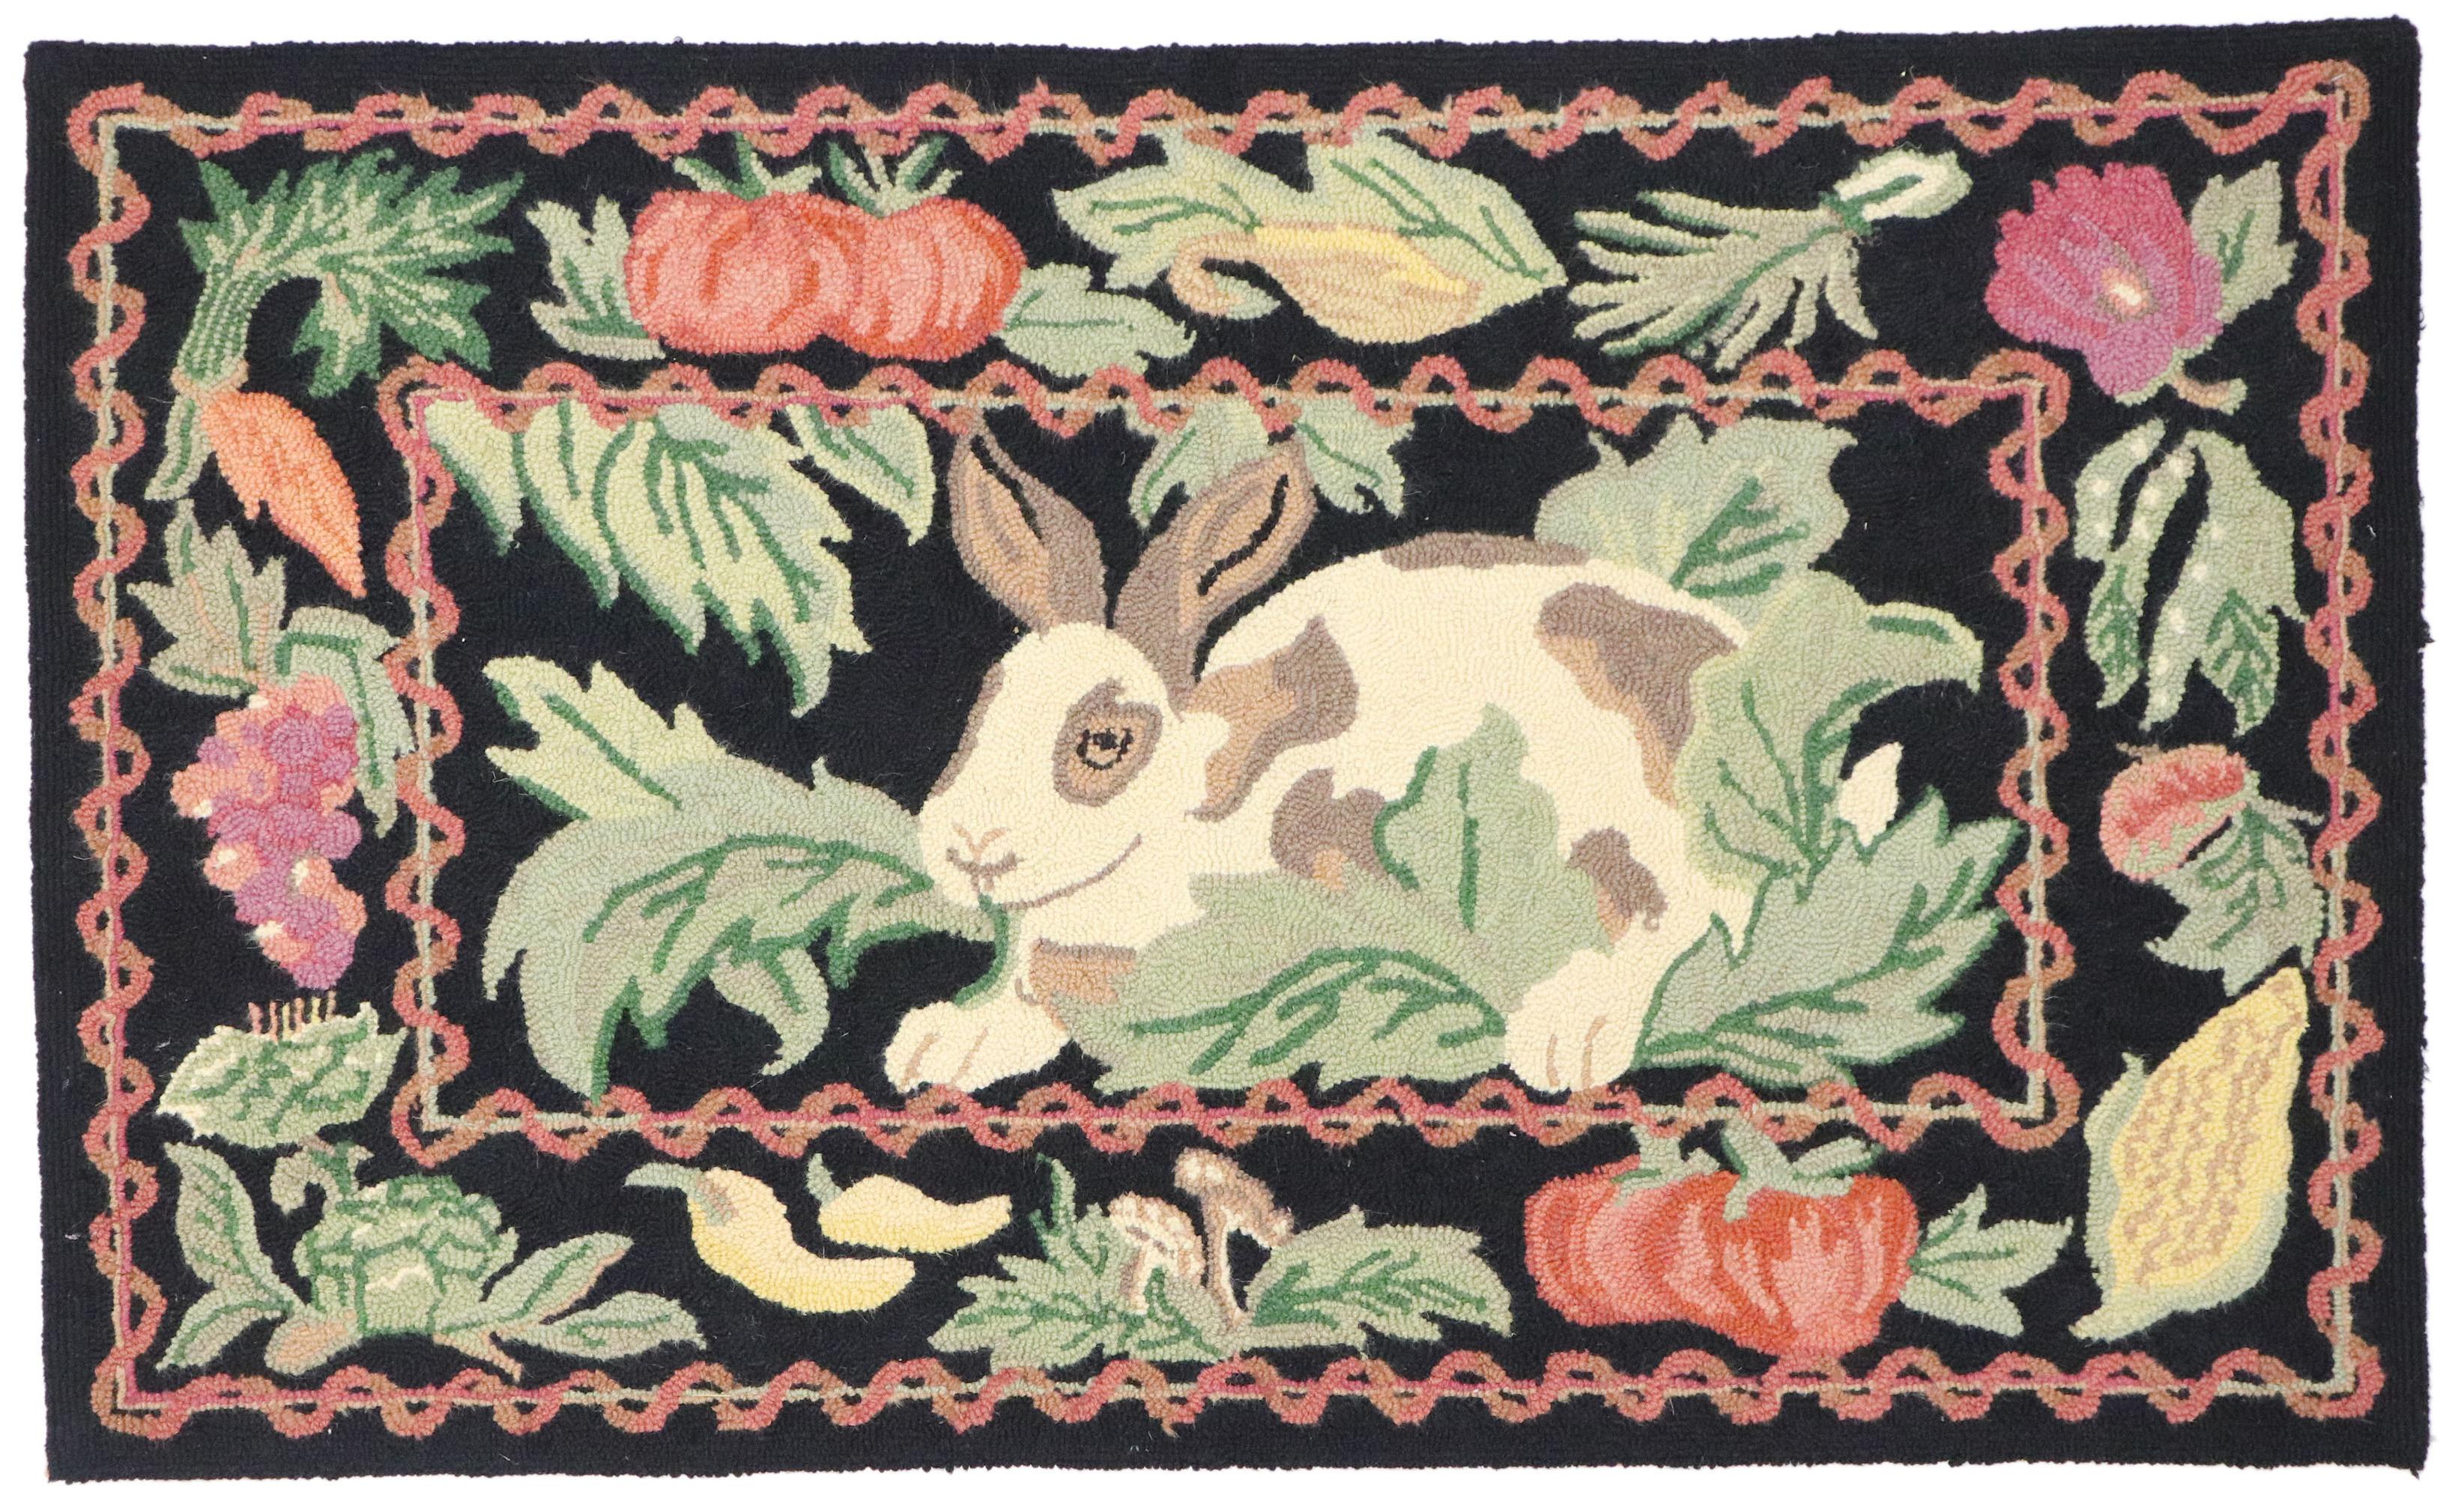 Vintage Garden Rabbit Hooked Rug with French Country Cottage Style In Good Condition For Sale In Dallas, TX